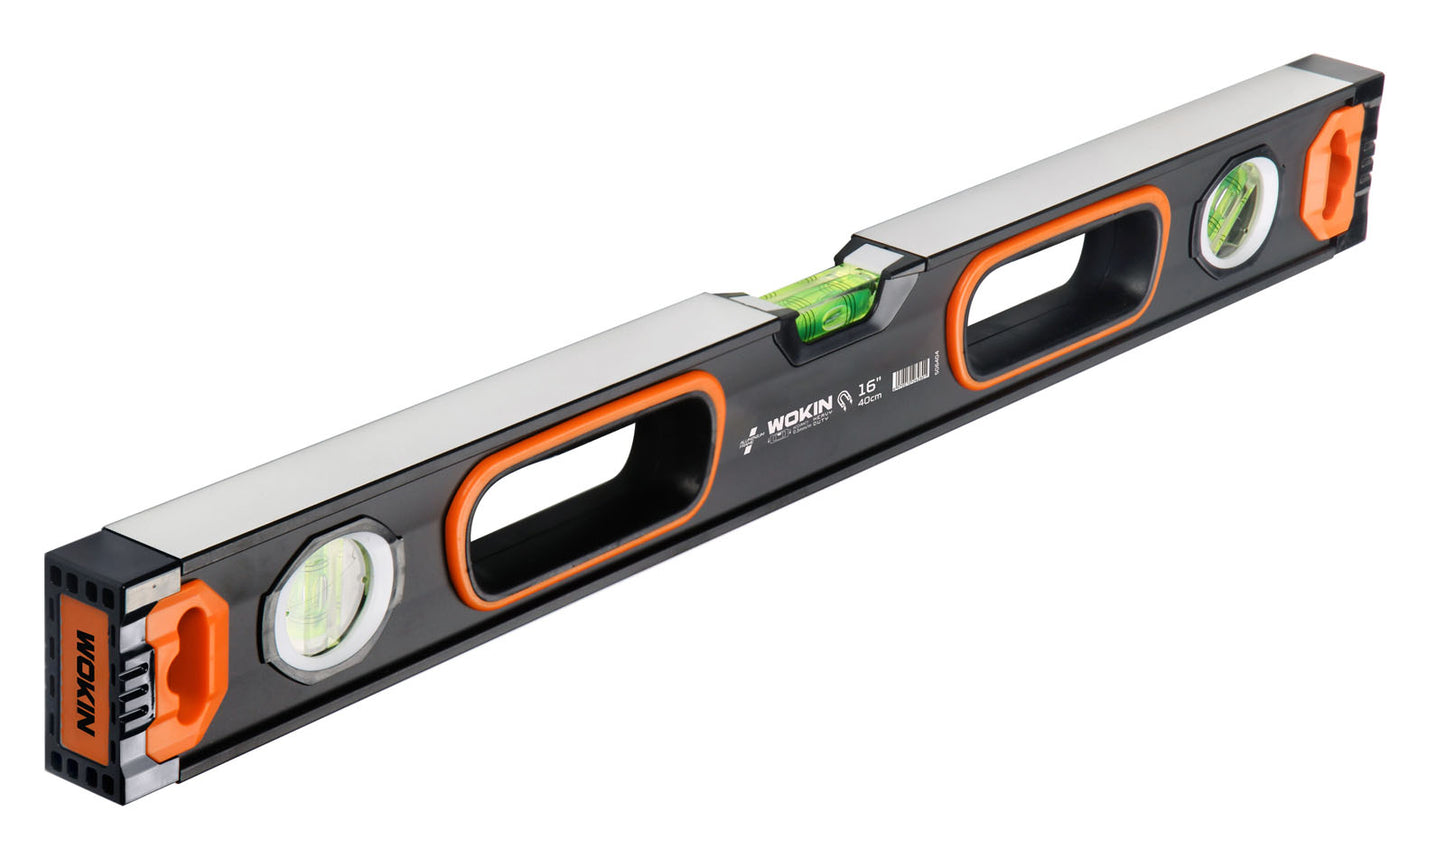 Wokin 16 Inch Spirit Level With Magnetic